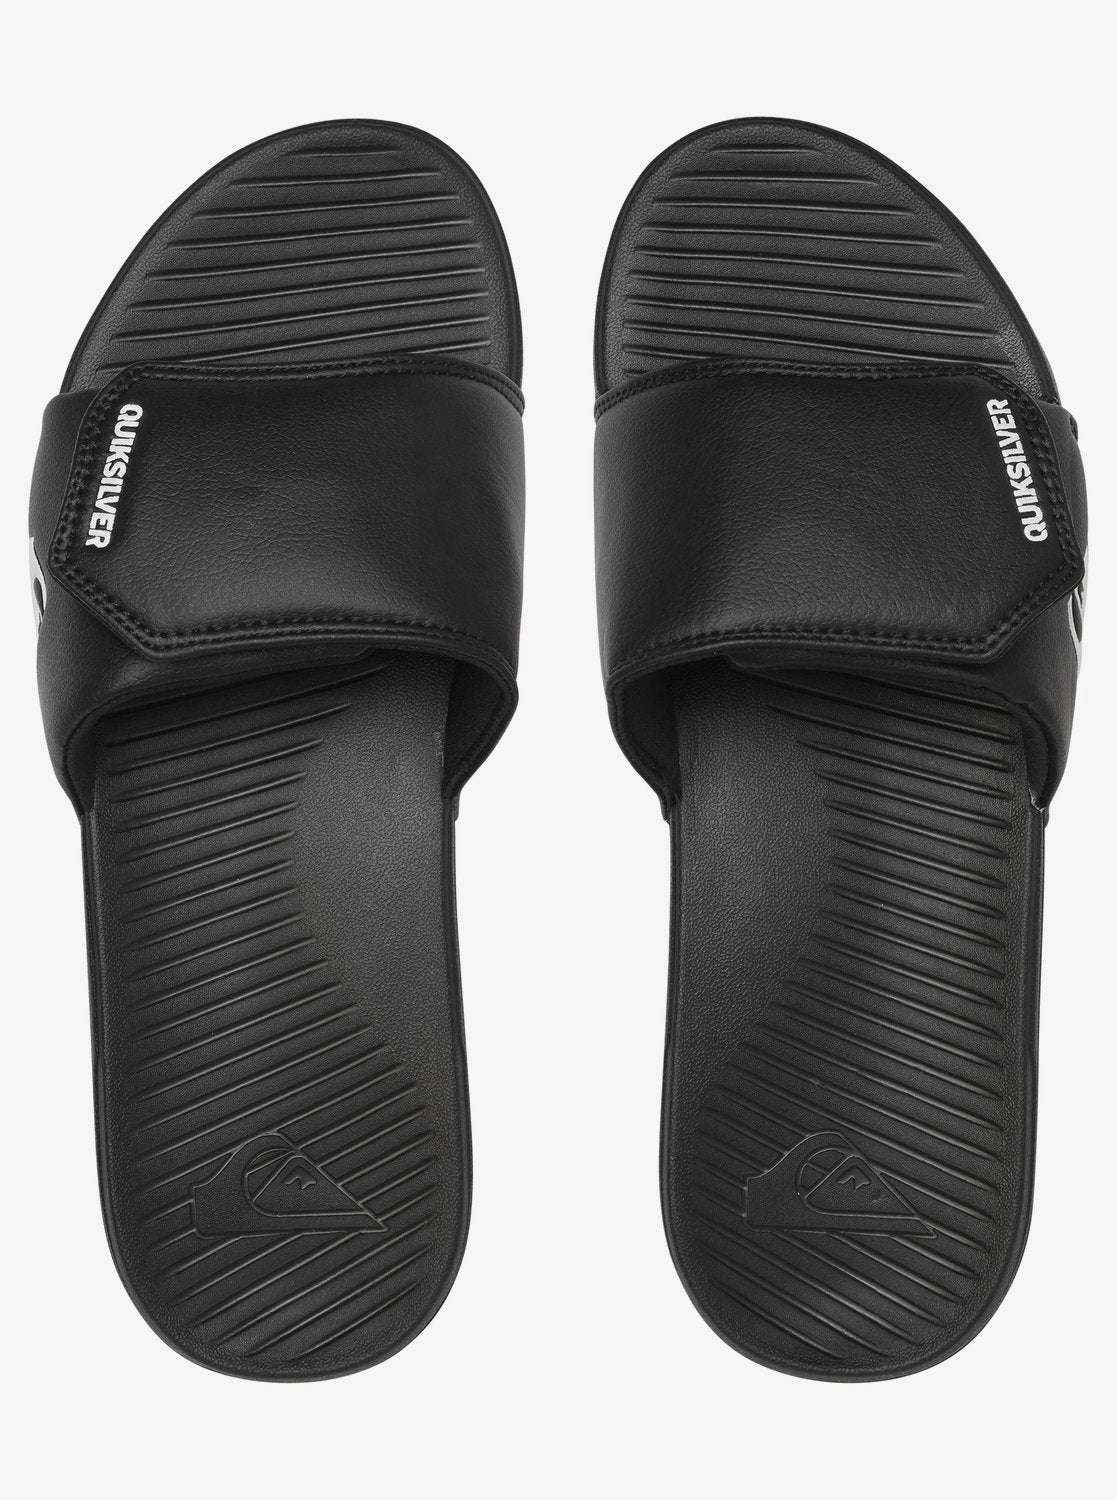 Quiksilver Bright Coast Adjustable Youth Sandals